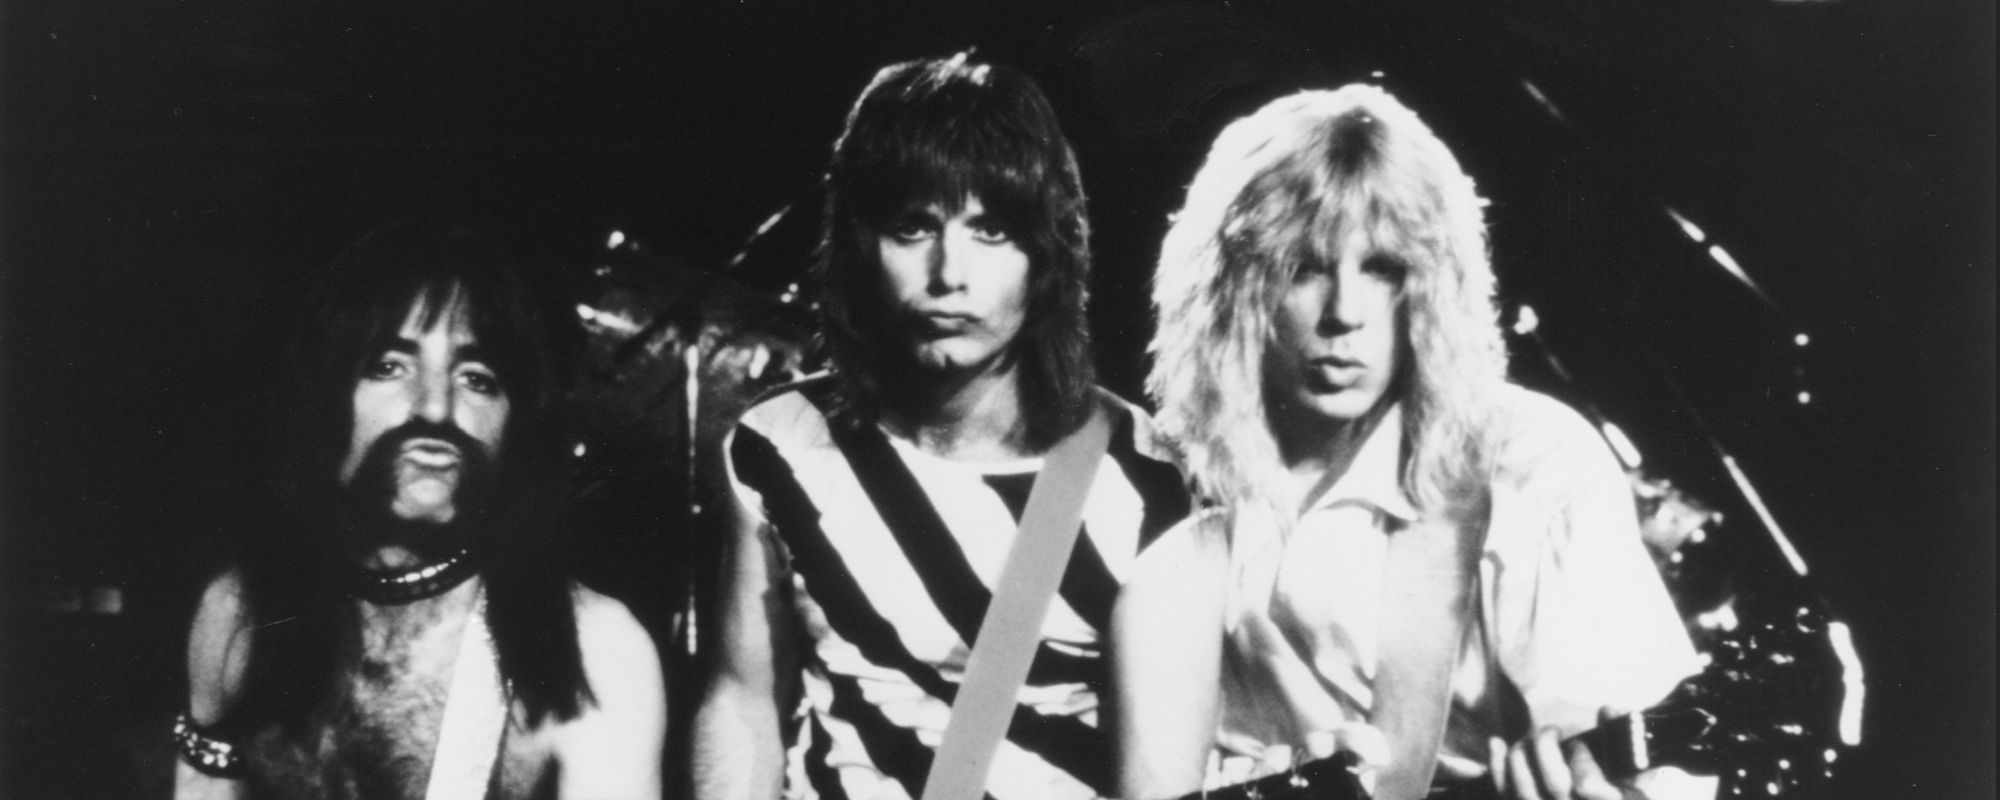 Fans Rejoice: ‘Spinal Tap II’ Set for Production with Original Cast Members